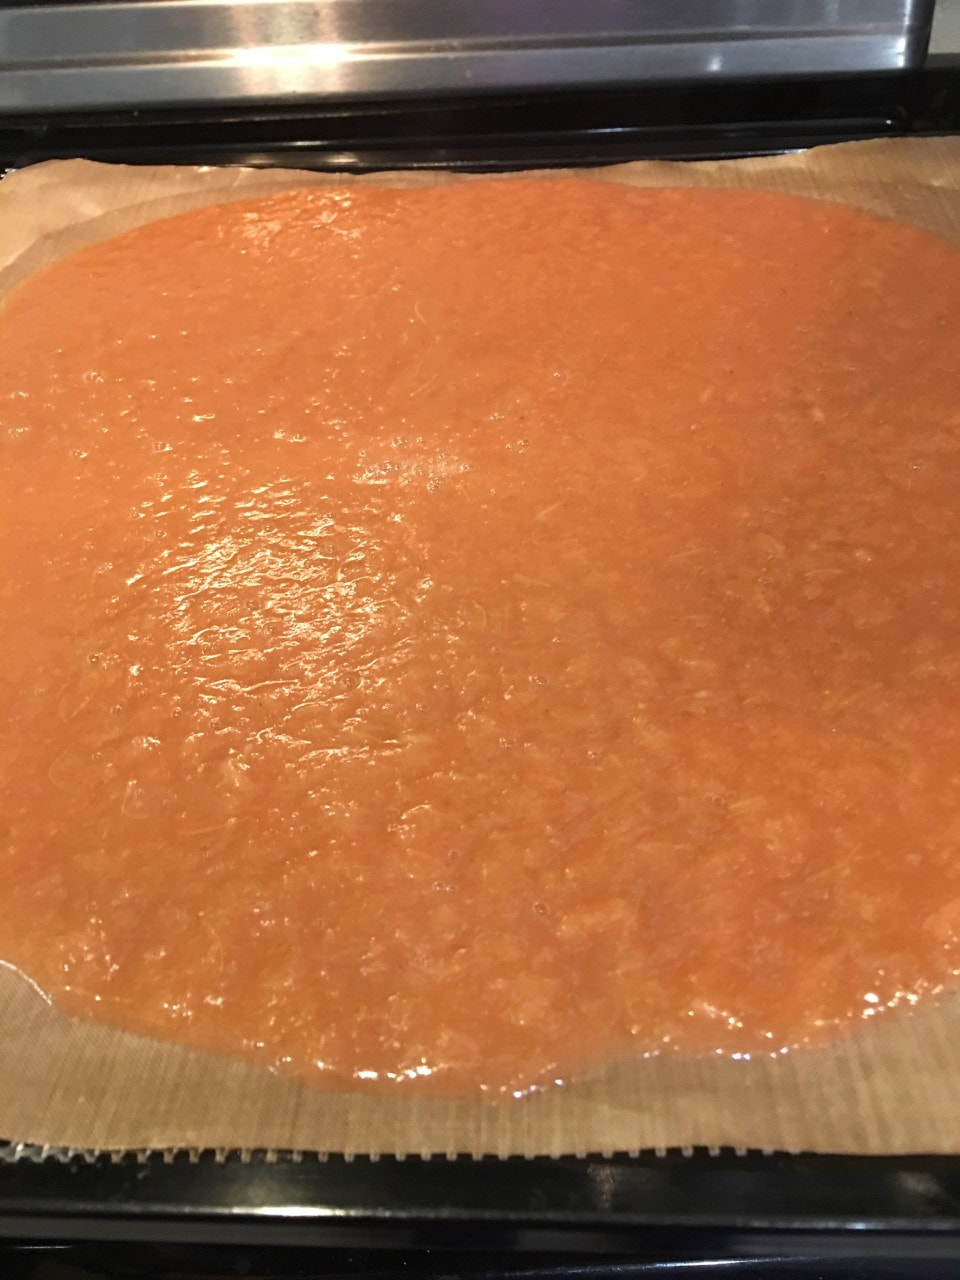 Strawberry rhubarb fruit leather puree spread out on a dehydrator sheet.